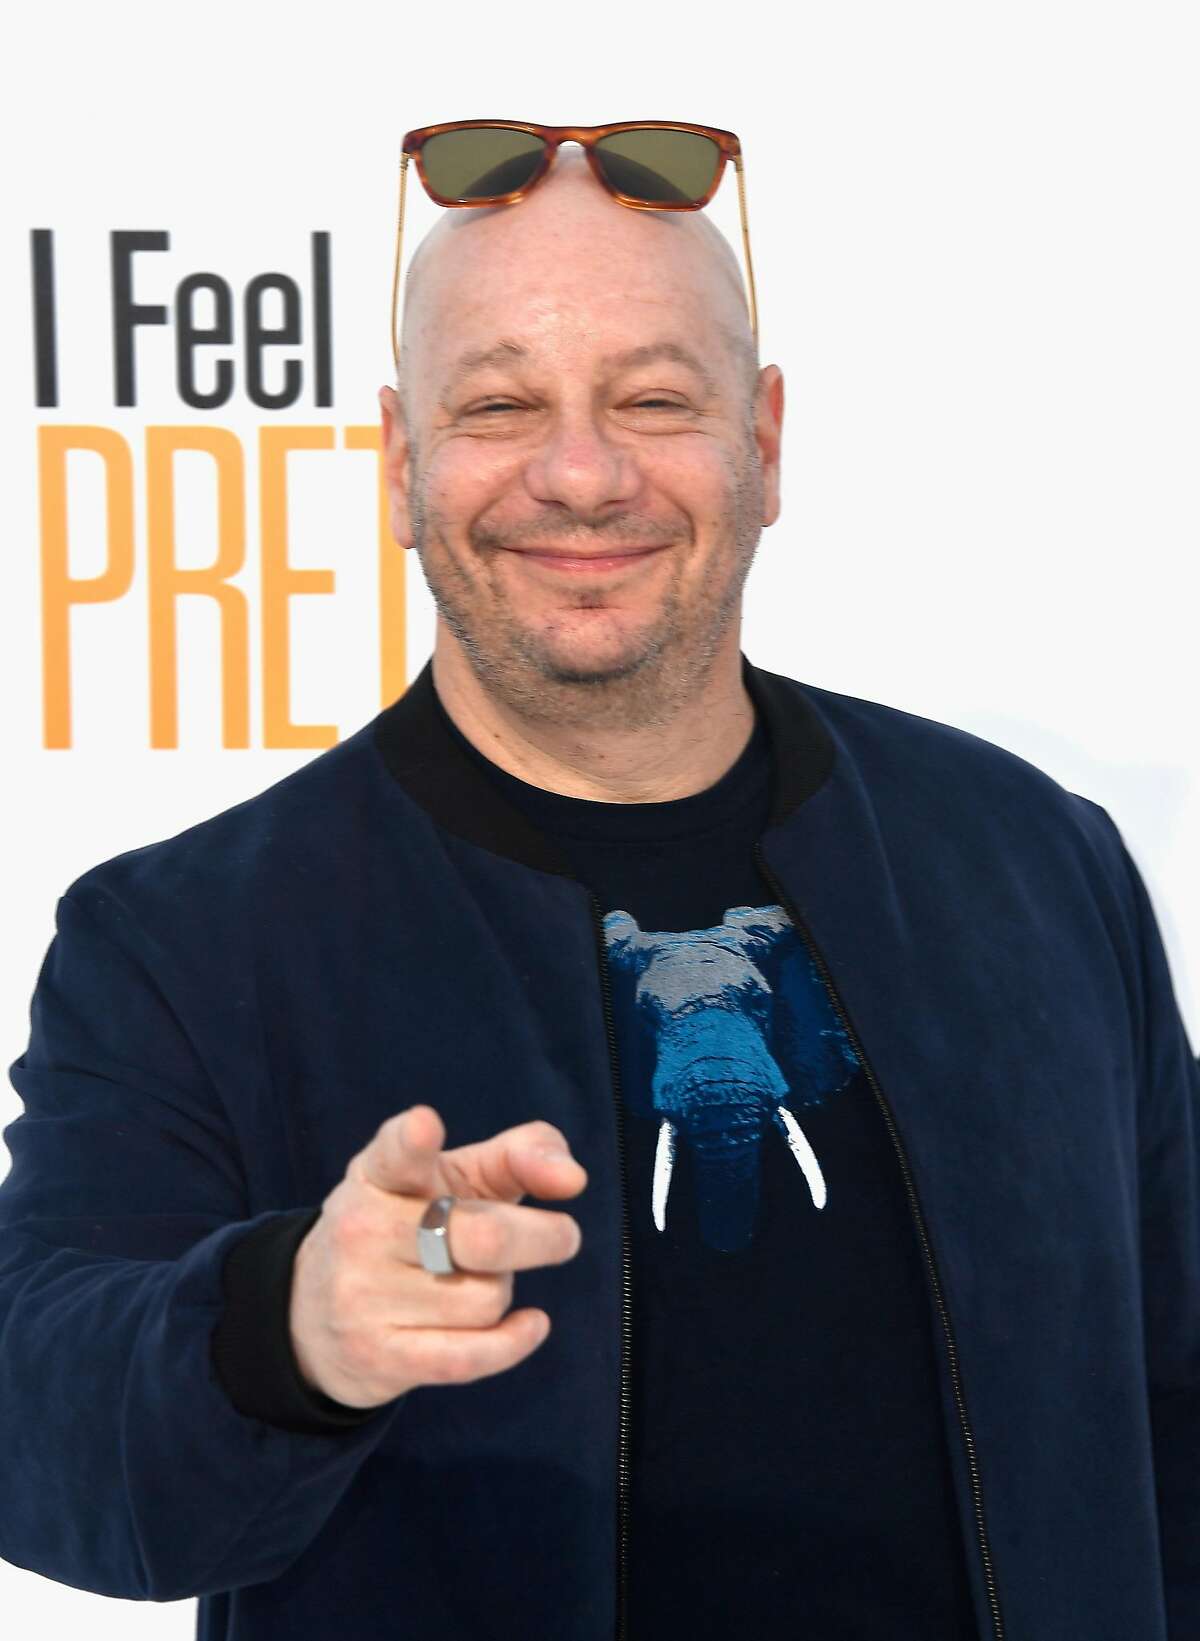 WESTWOOD, CA - APRIL 17: Jeff Ross attends the premiere of STX Films' "I Feel Pretty" at Westwood Village Theatre on April 17, 2018 in Westwood, California. (Photo by Frazer Harrison/Getty Images)